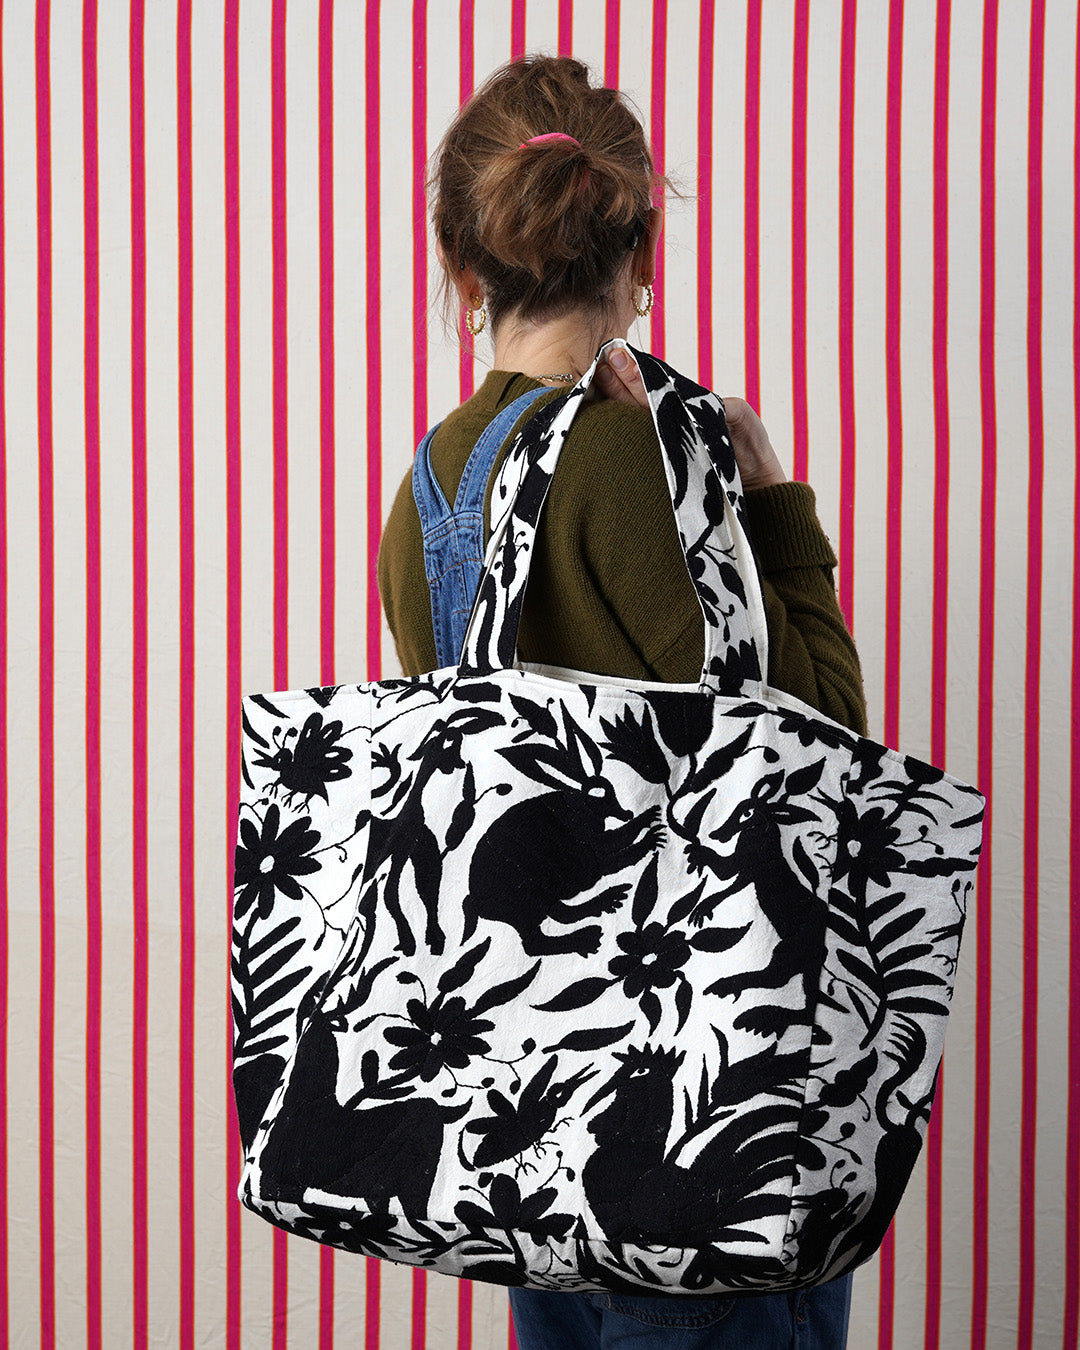 Off Cut Tote Bag - Black Otomi, Hand Embroidered